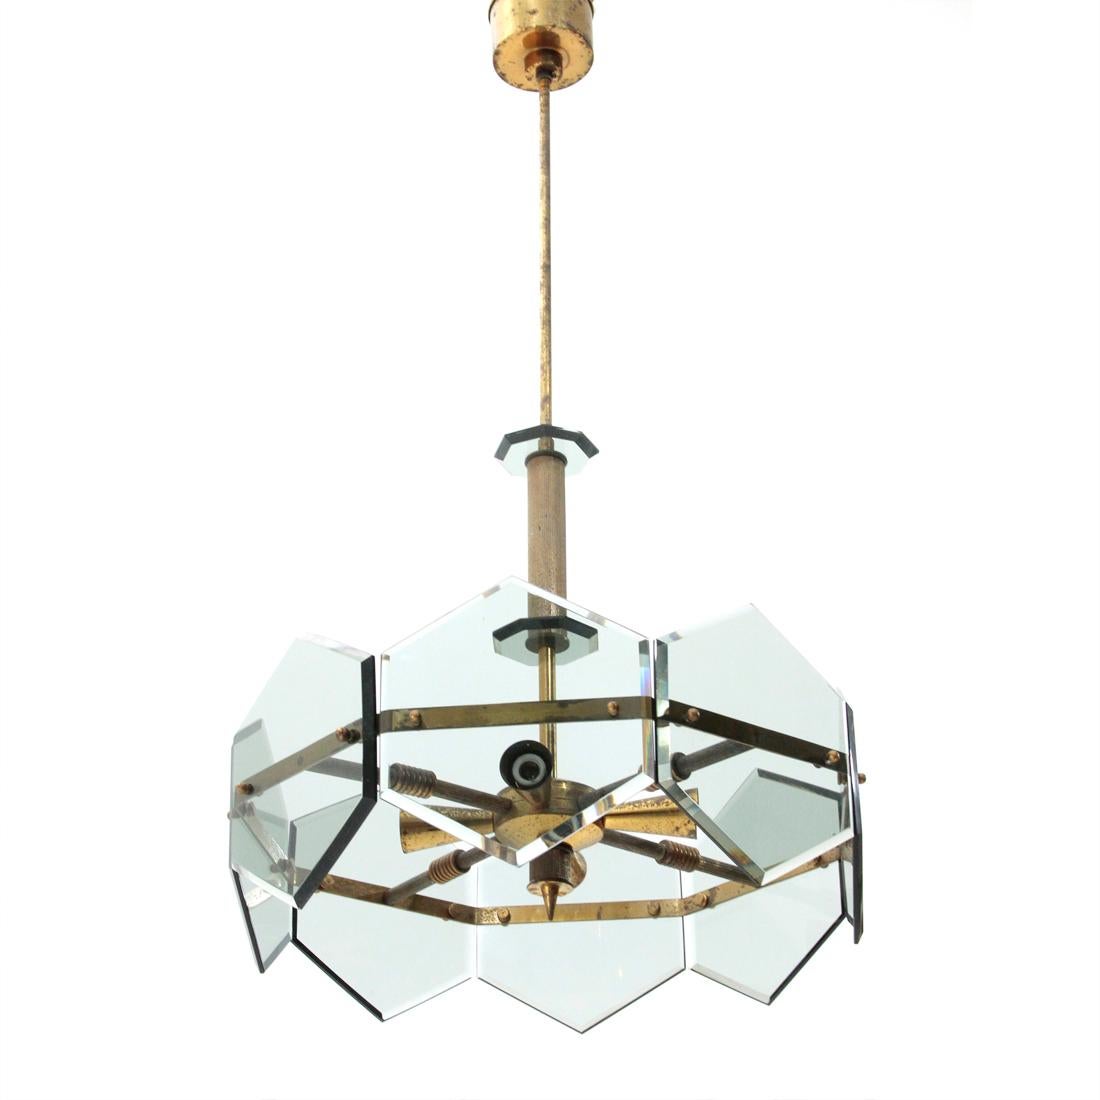 Chandelier produced by Gino Paroldo of Milan in the 1960s.
Brass structure.
Smoked glass diffusers of hexagonal shape with bevelled edges.
Good general conditions, some signs due to normal use over time.

Dimensions: Diameter 45 cm, height 85